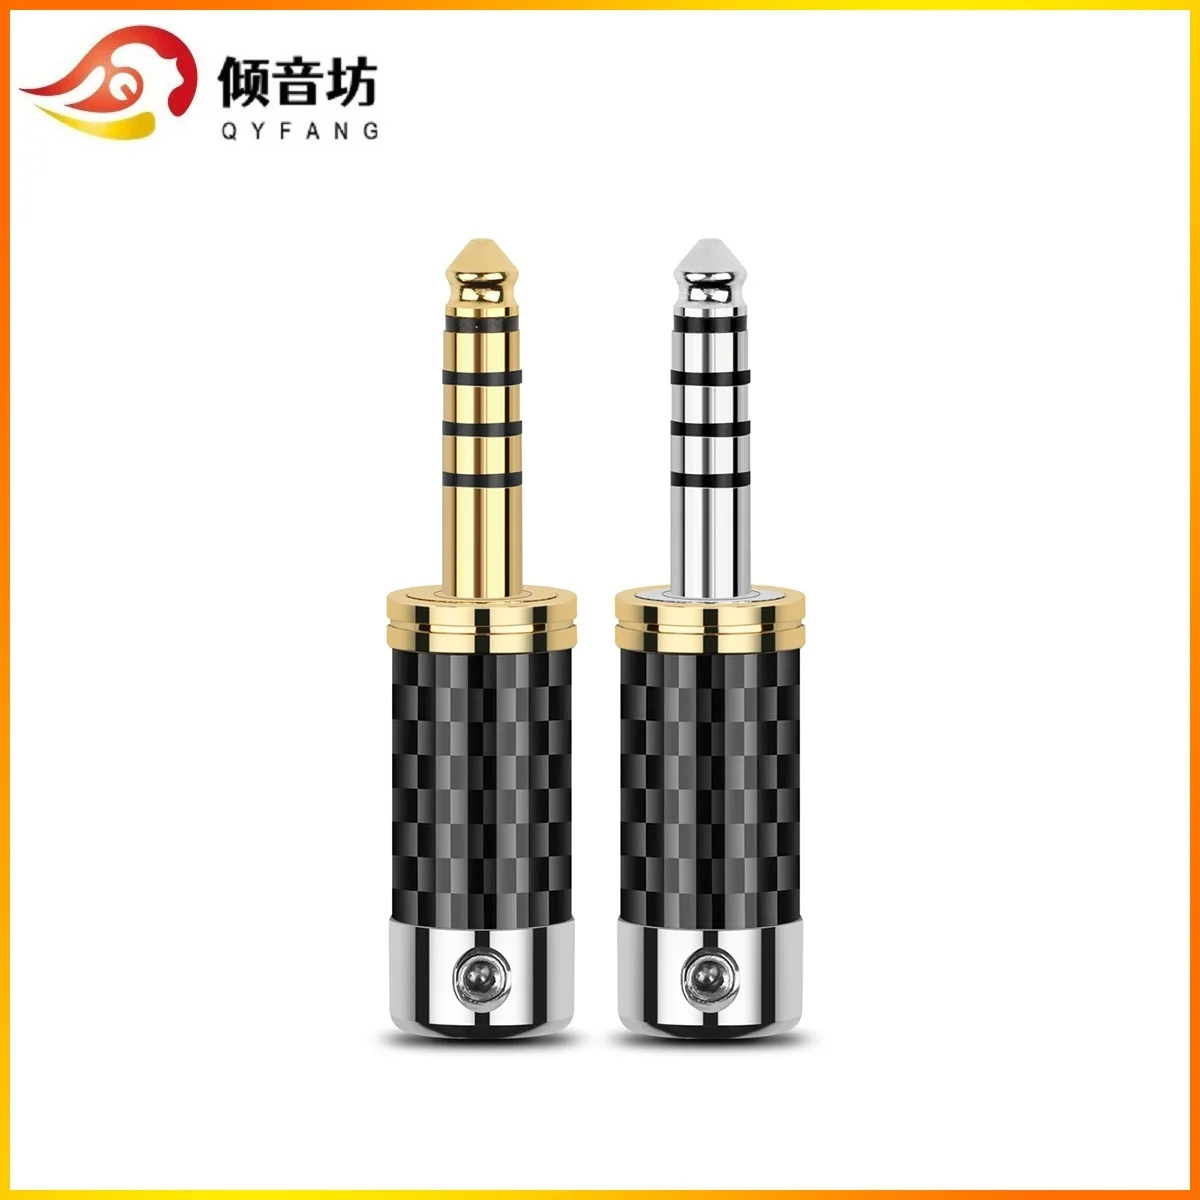 

QYFANG 4.4mm 5 Pole Balanced Stereo Adapter Carbon Fiber Audio Jack Rhodium Plated Earphone Plug Wire Connector For NW-WM1ZA4.4